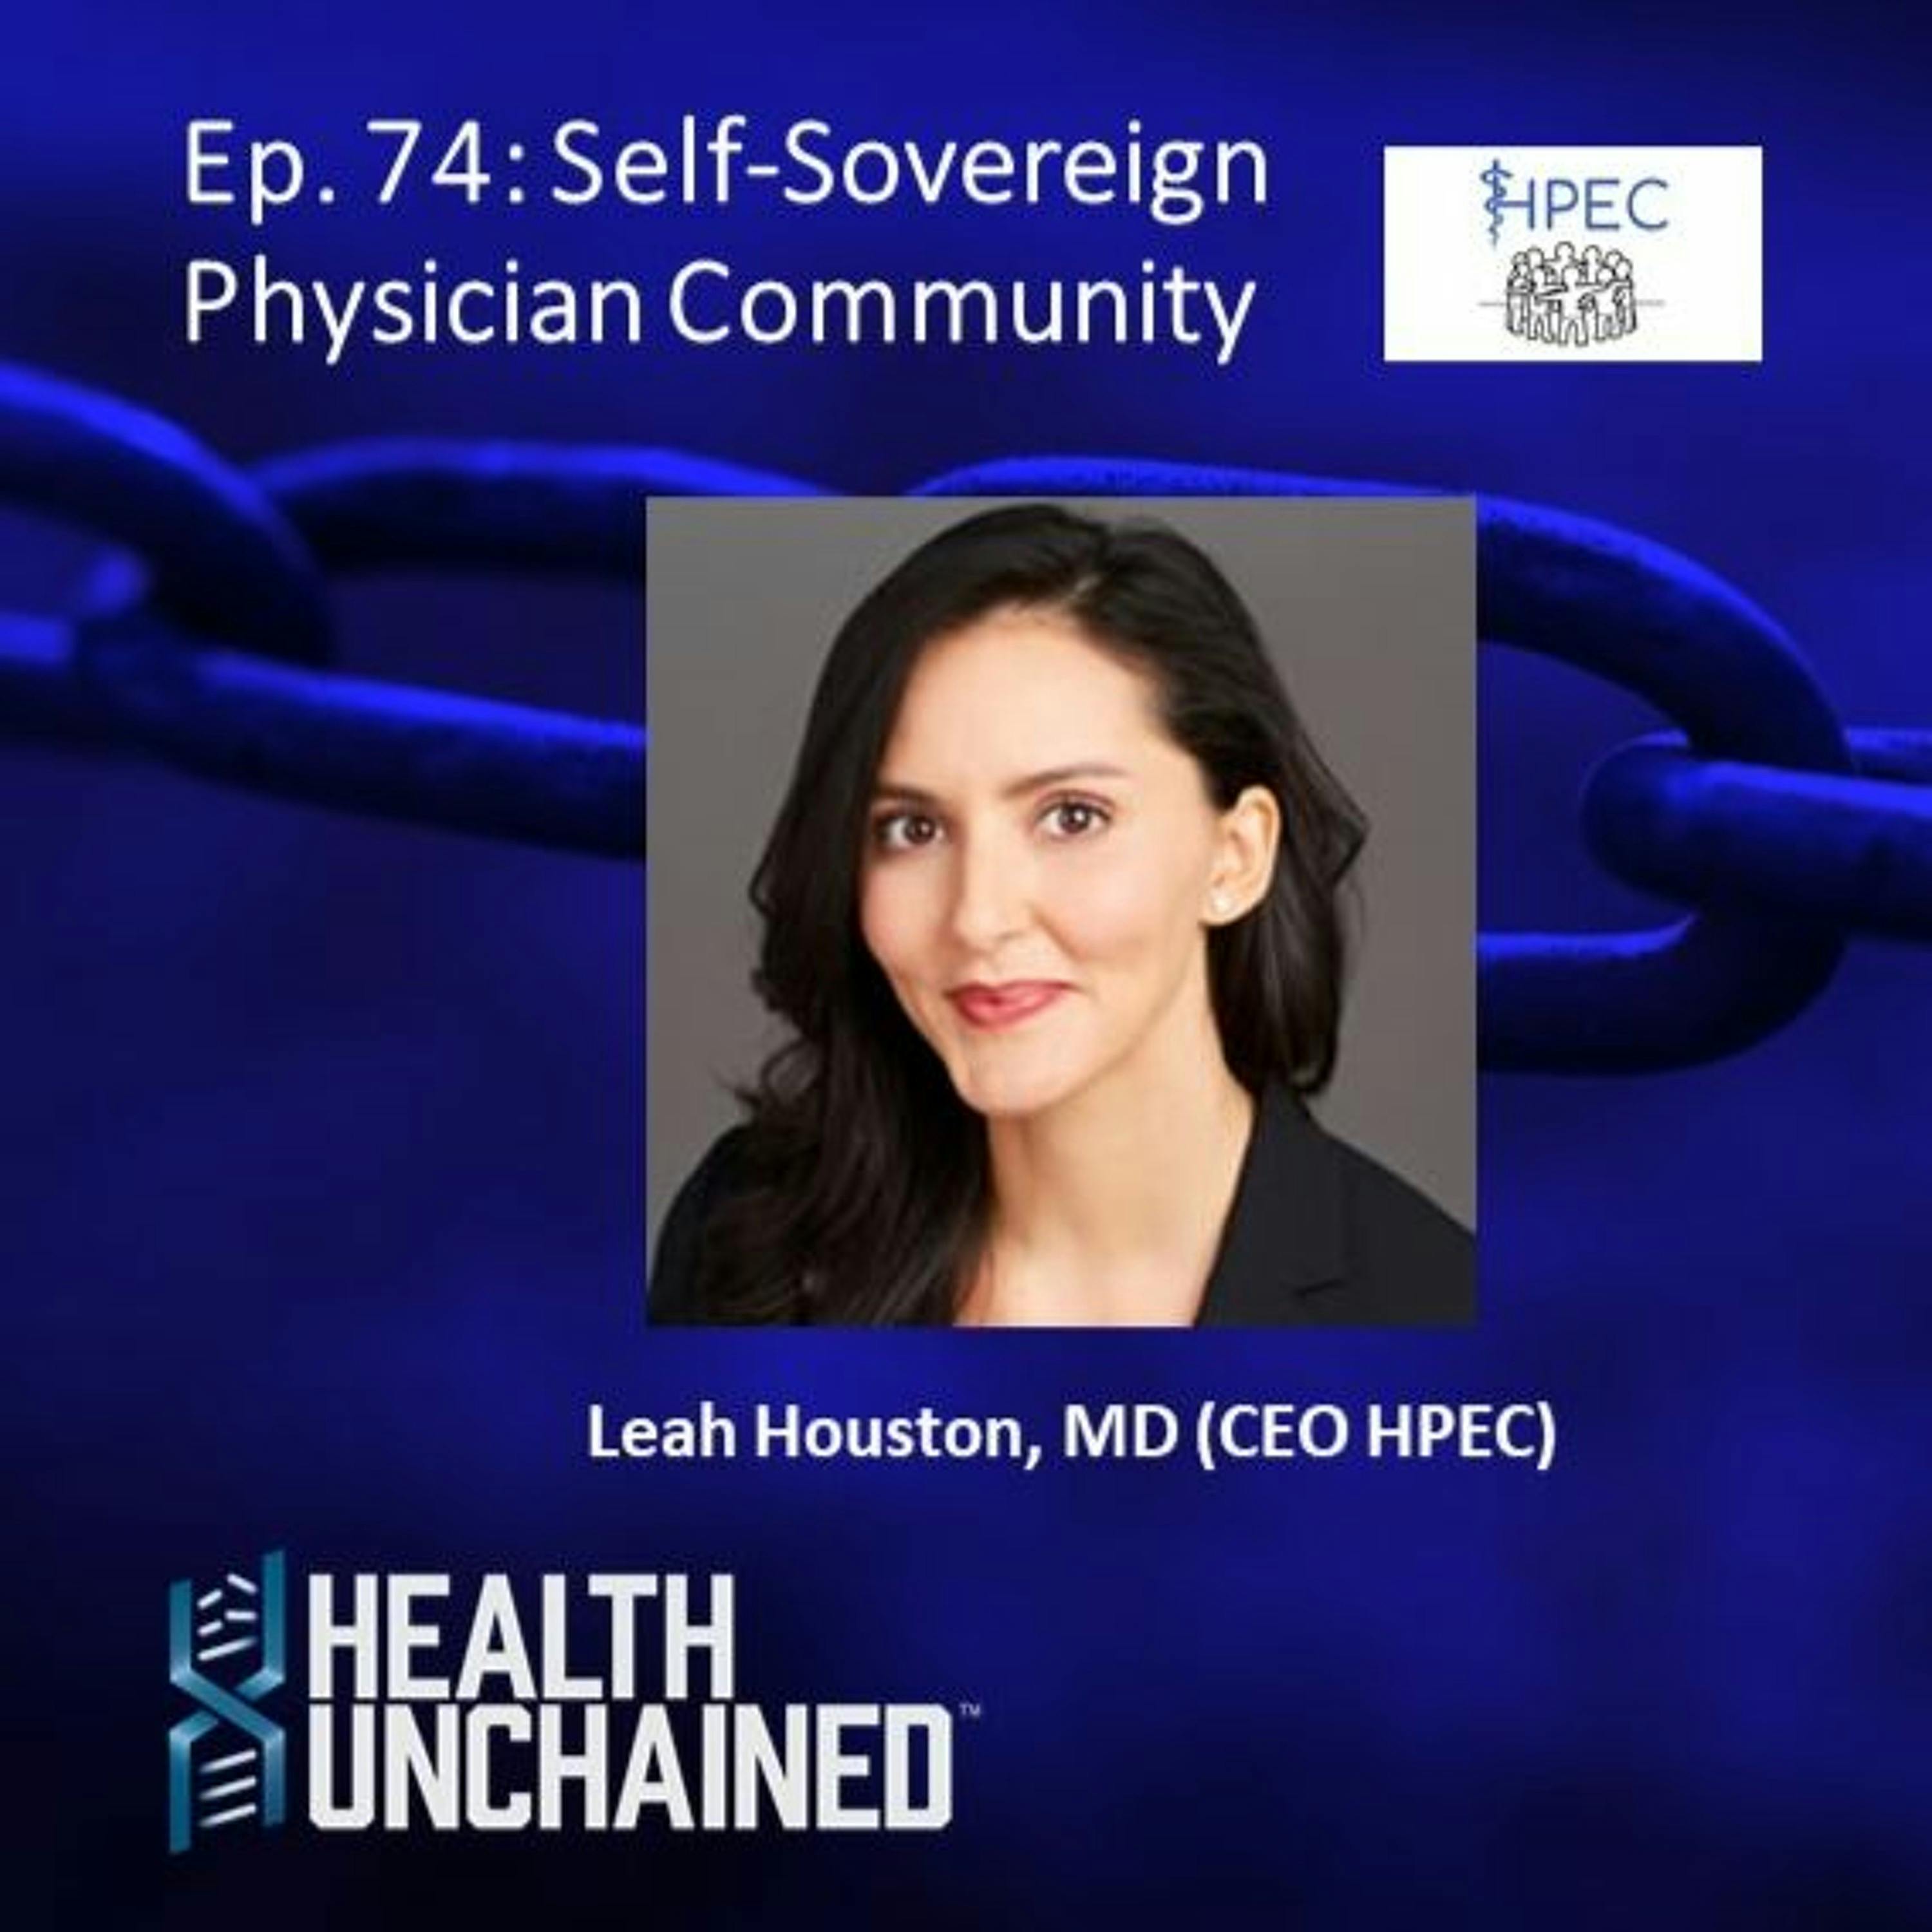 Ep. 74: Self-Sovereign Physician Community – Leah Houston, MD (CEO HPEC)